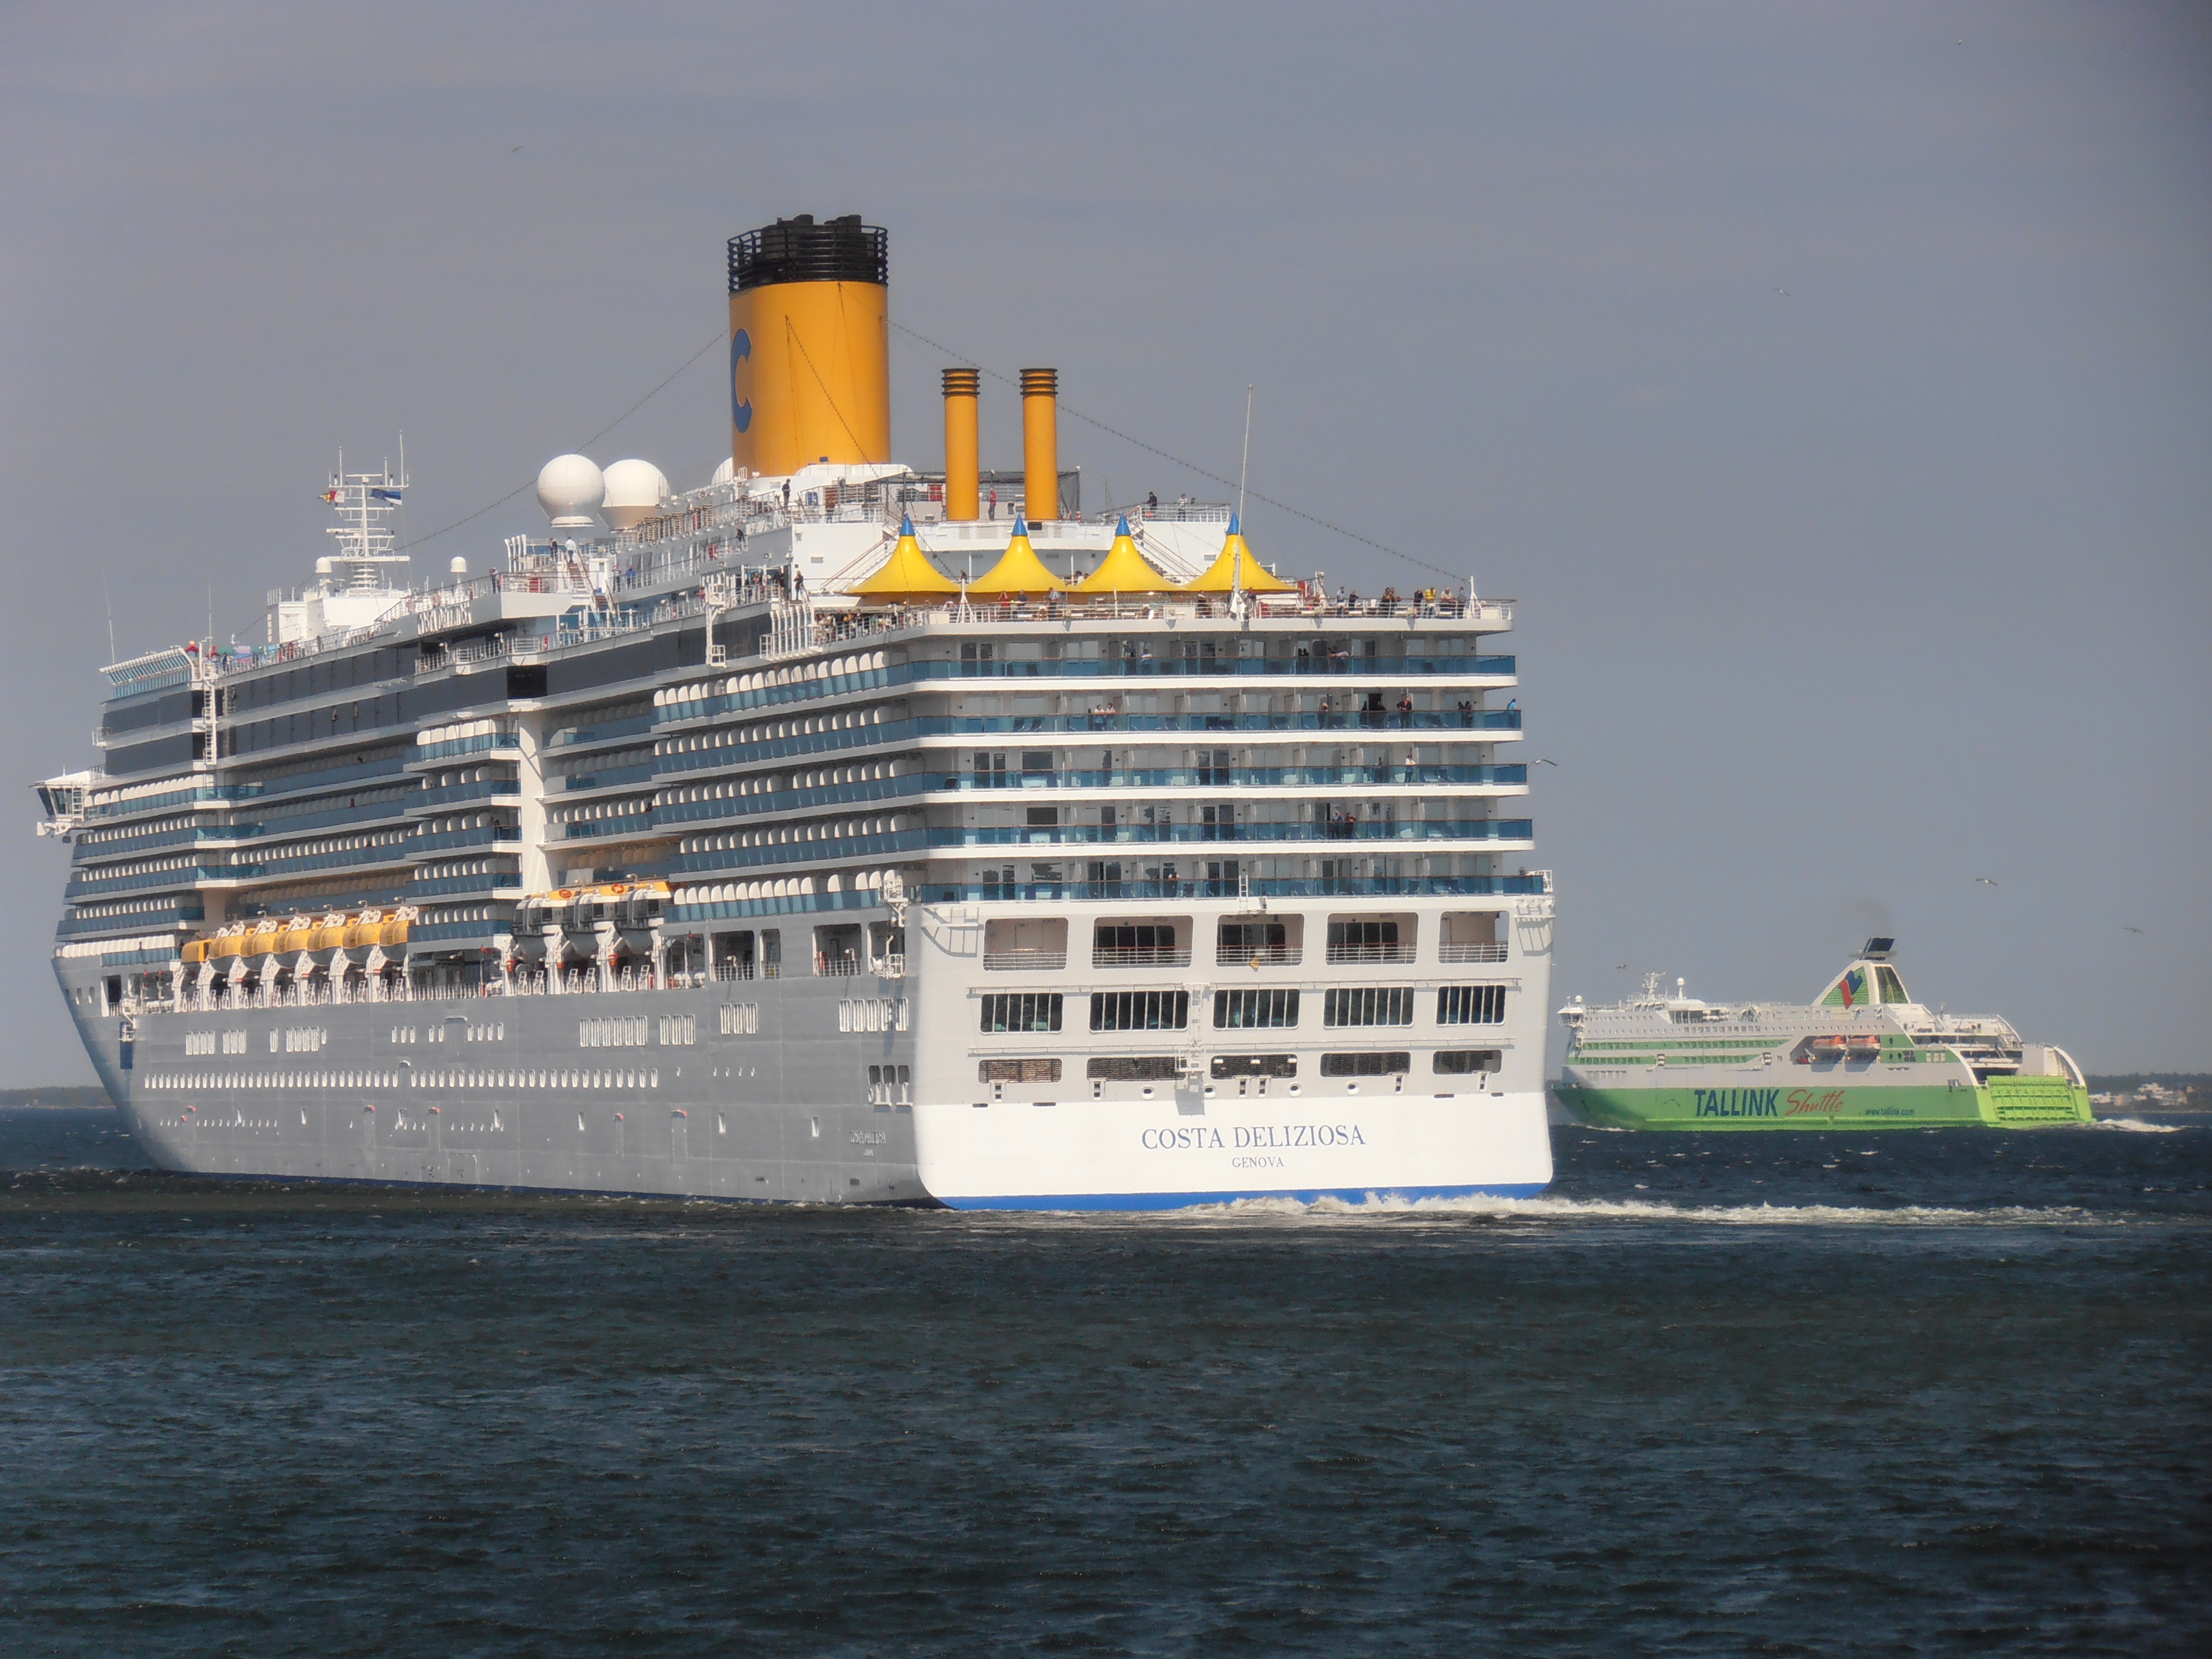 Costa Deliziosa and Star departing from Tallinn 22 May 2012